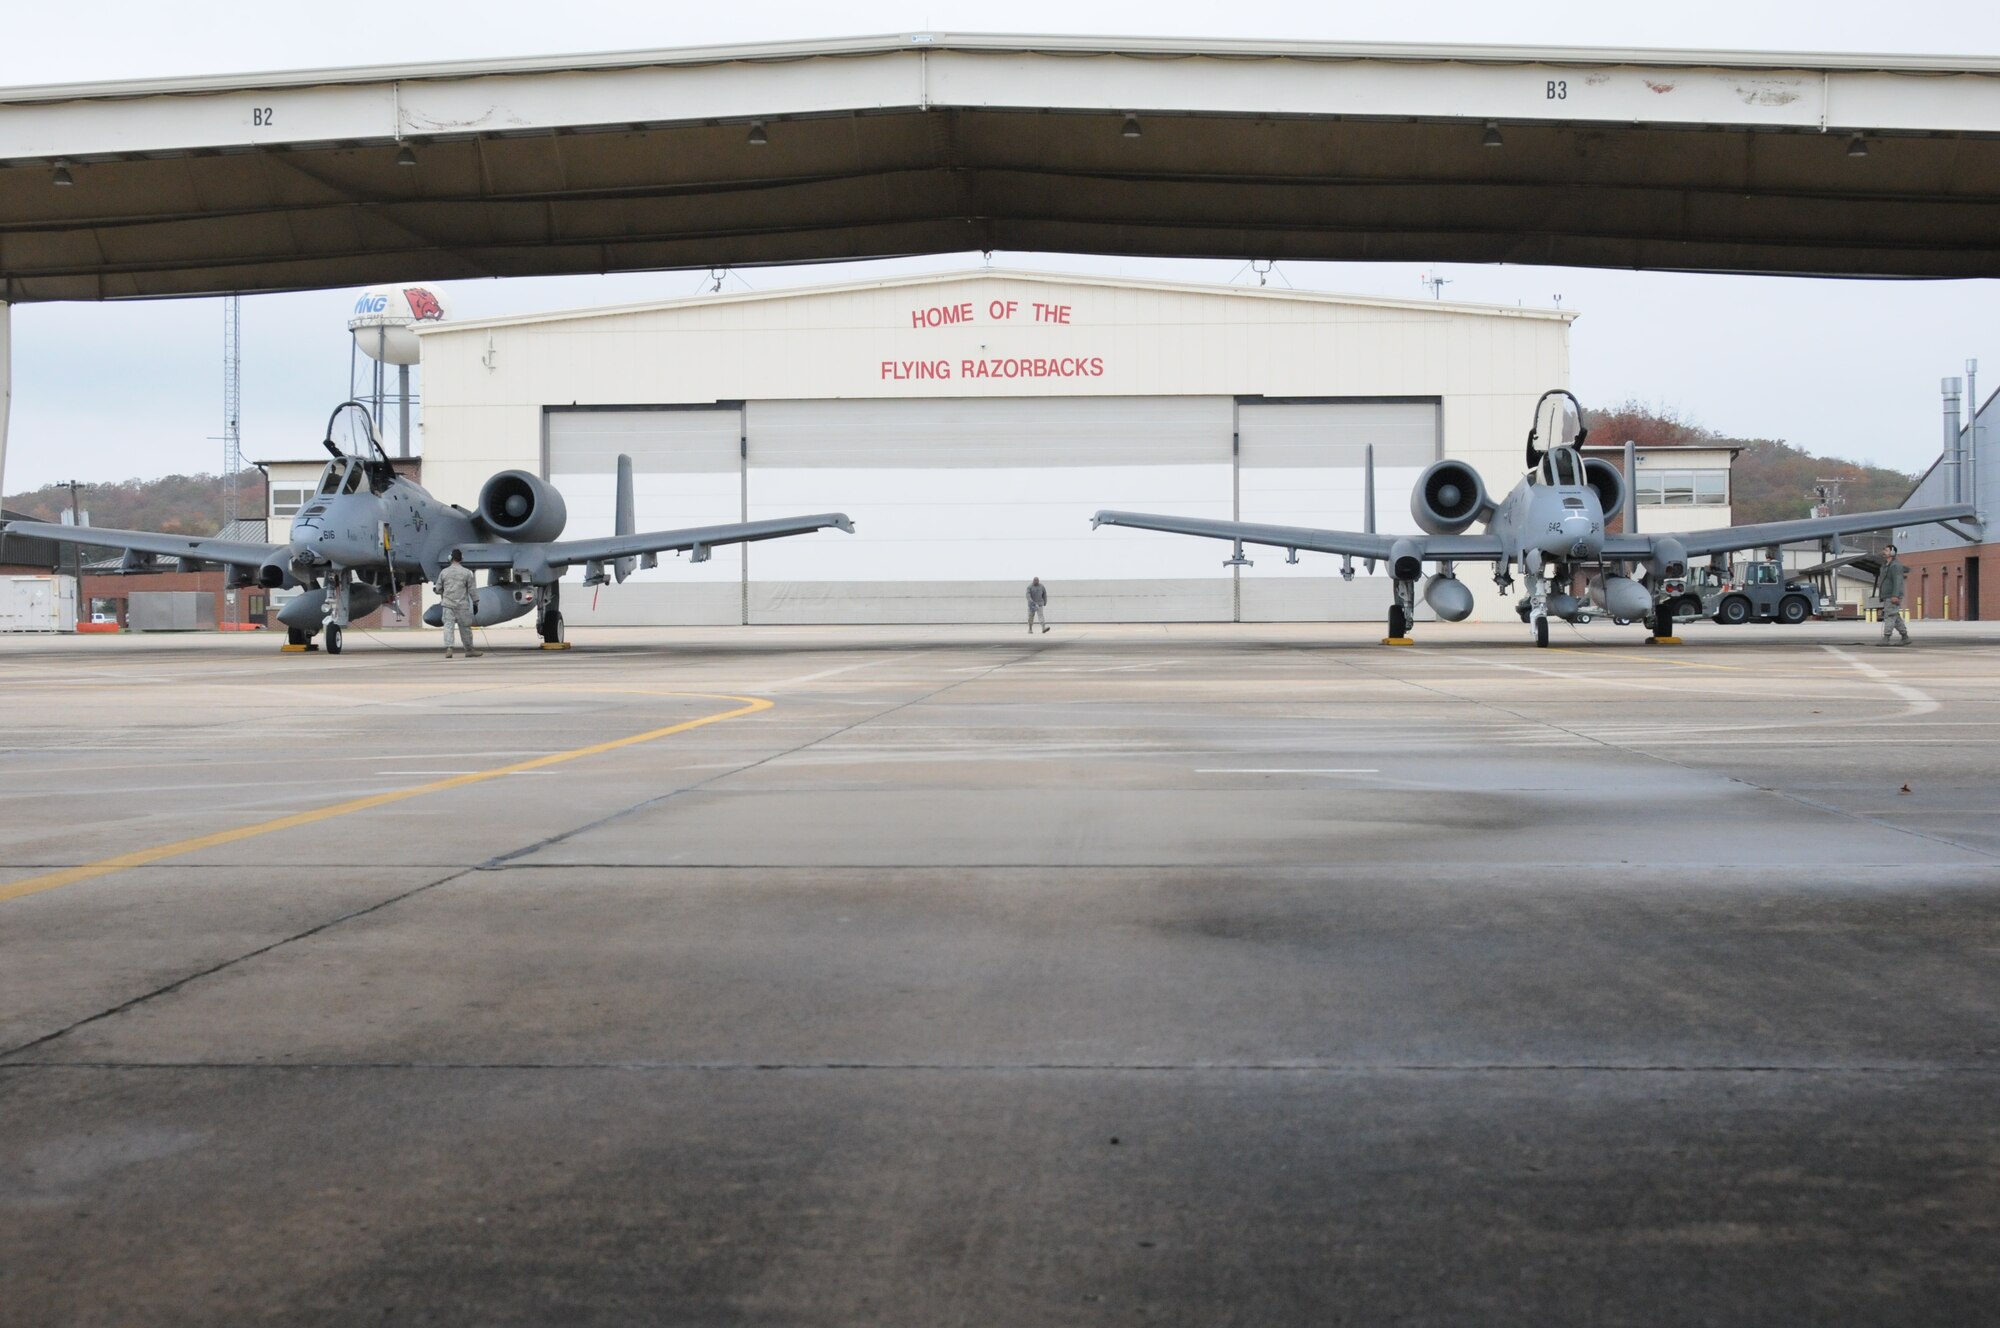 Another pair of A-10C Thunderbolt IIs roared off into the wild blue yonder Nov. 6 bound for Moody Air Force Base, Ga. Tail Nos. 0616 and 0642 departed the 188th Fighter Wing's Ebbing Air National Guard Base as part of the wing’s on-going conversion from a fighter mission to remotely piloted aircraft and Intelligence mission, which will include a space-focused targeting squadron. (U.S. Air National Guard photo by Tech Sgt. Josh Lewis/188th Fighter Wing Public Affairs)